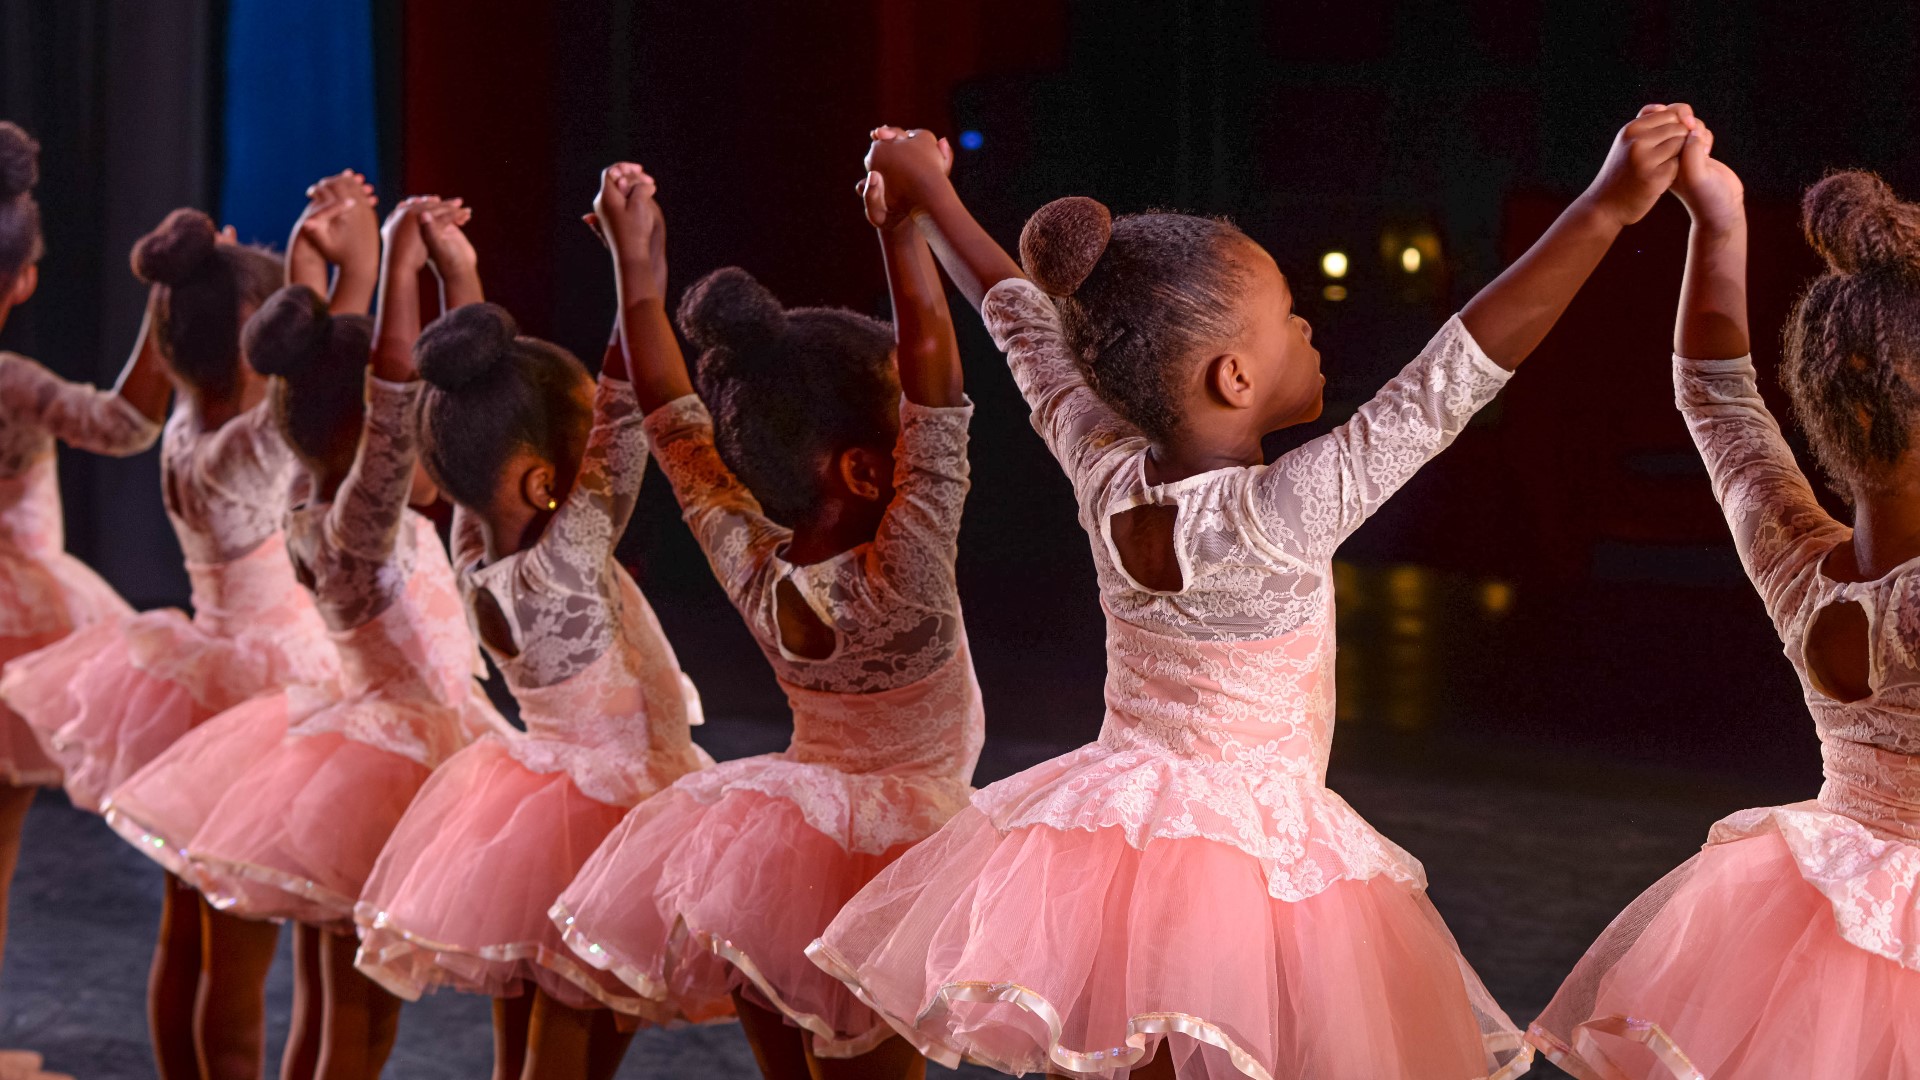 Paula Brown, founder of The Paula Brown Performance Arts Center & Brown Ballerinas shares how she supports young people of color in dance, and discusses her new book